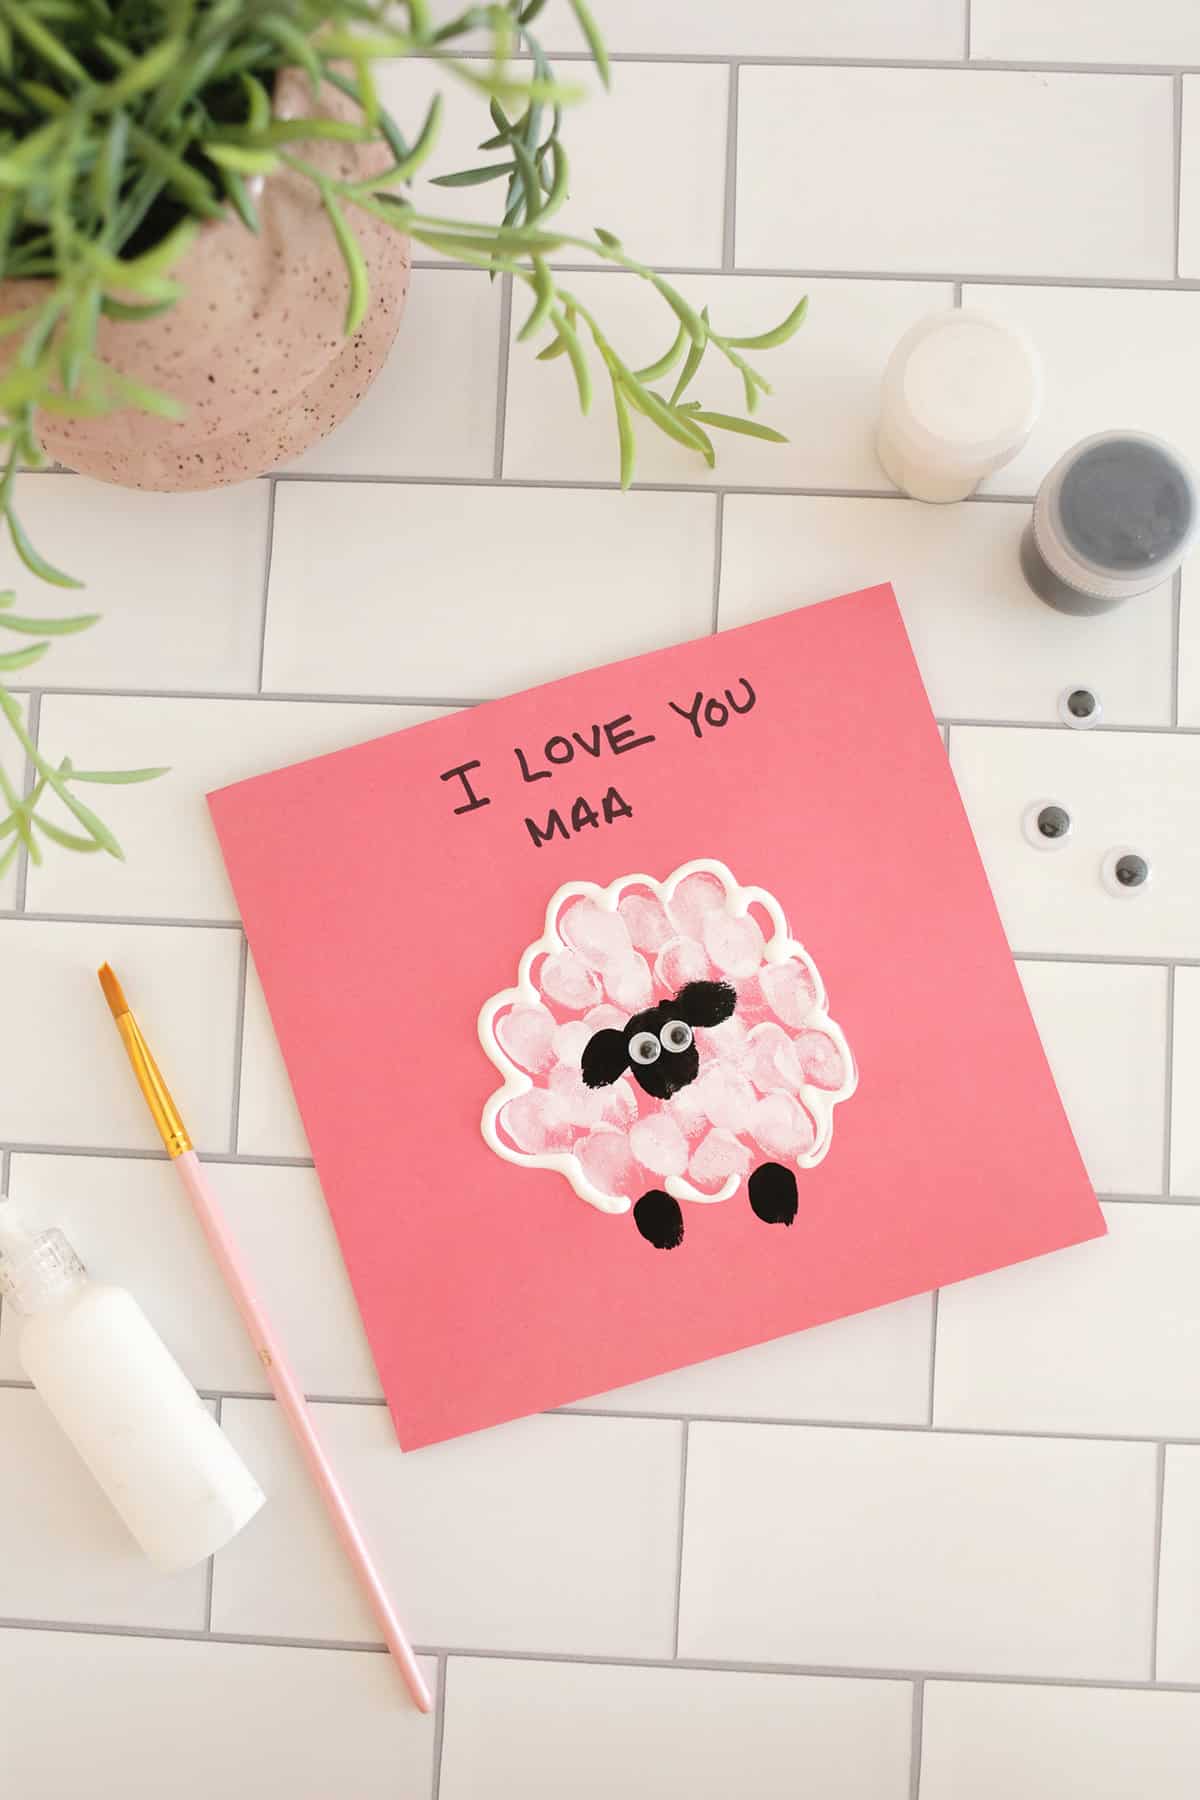 Sheep card made with child's fingerprints